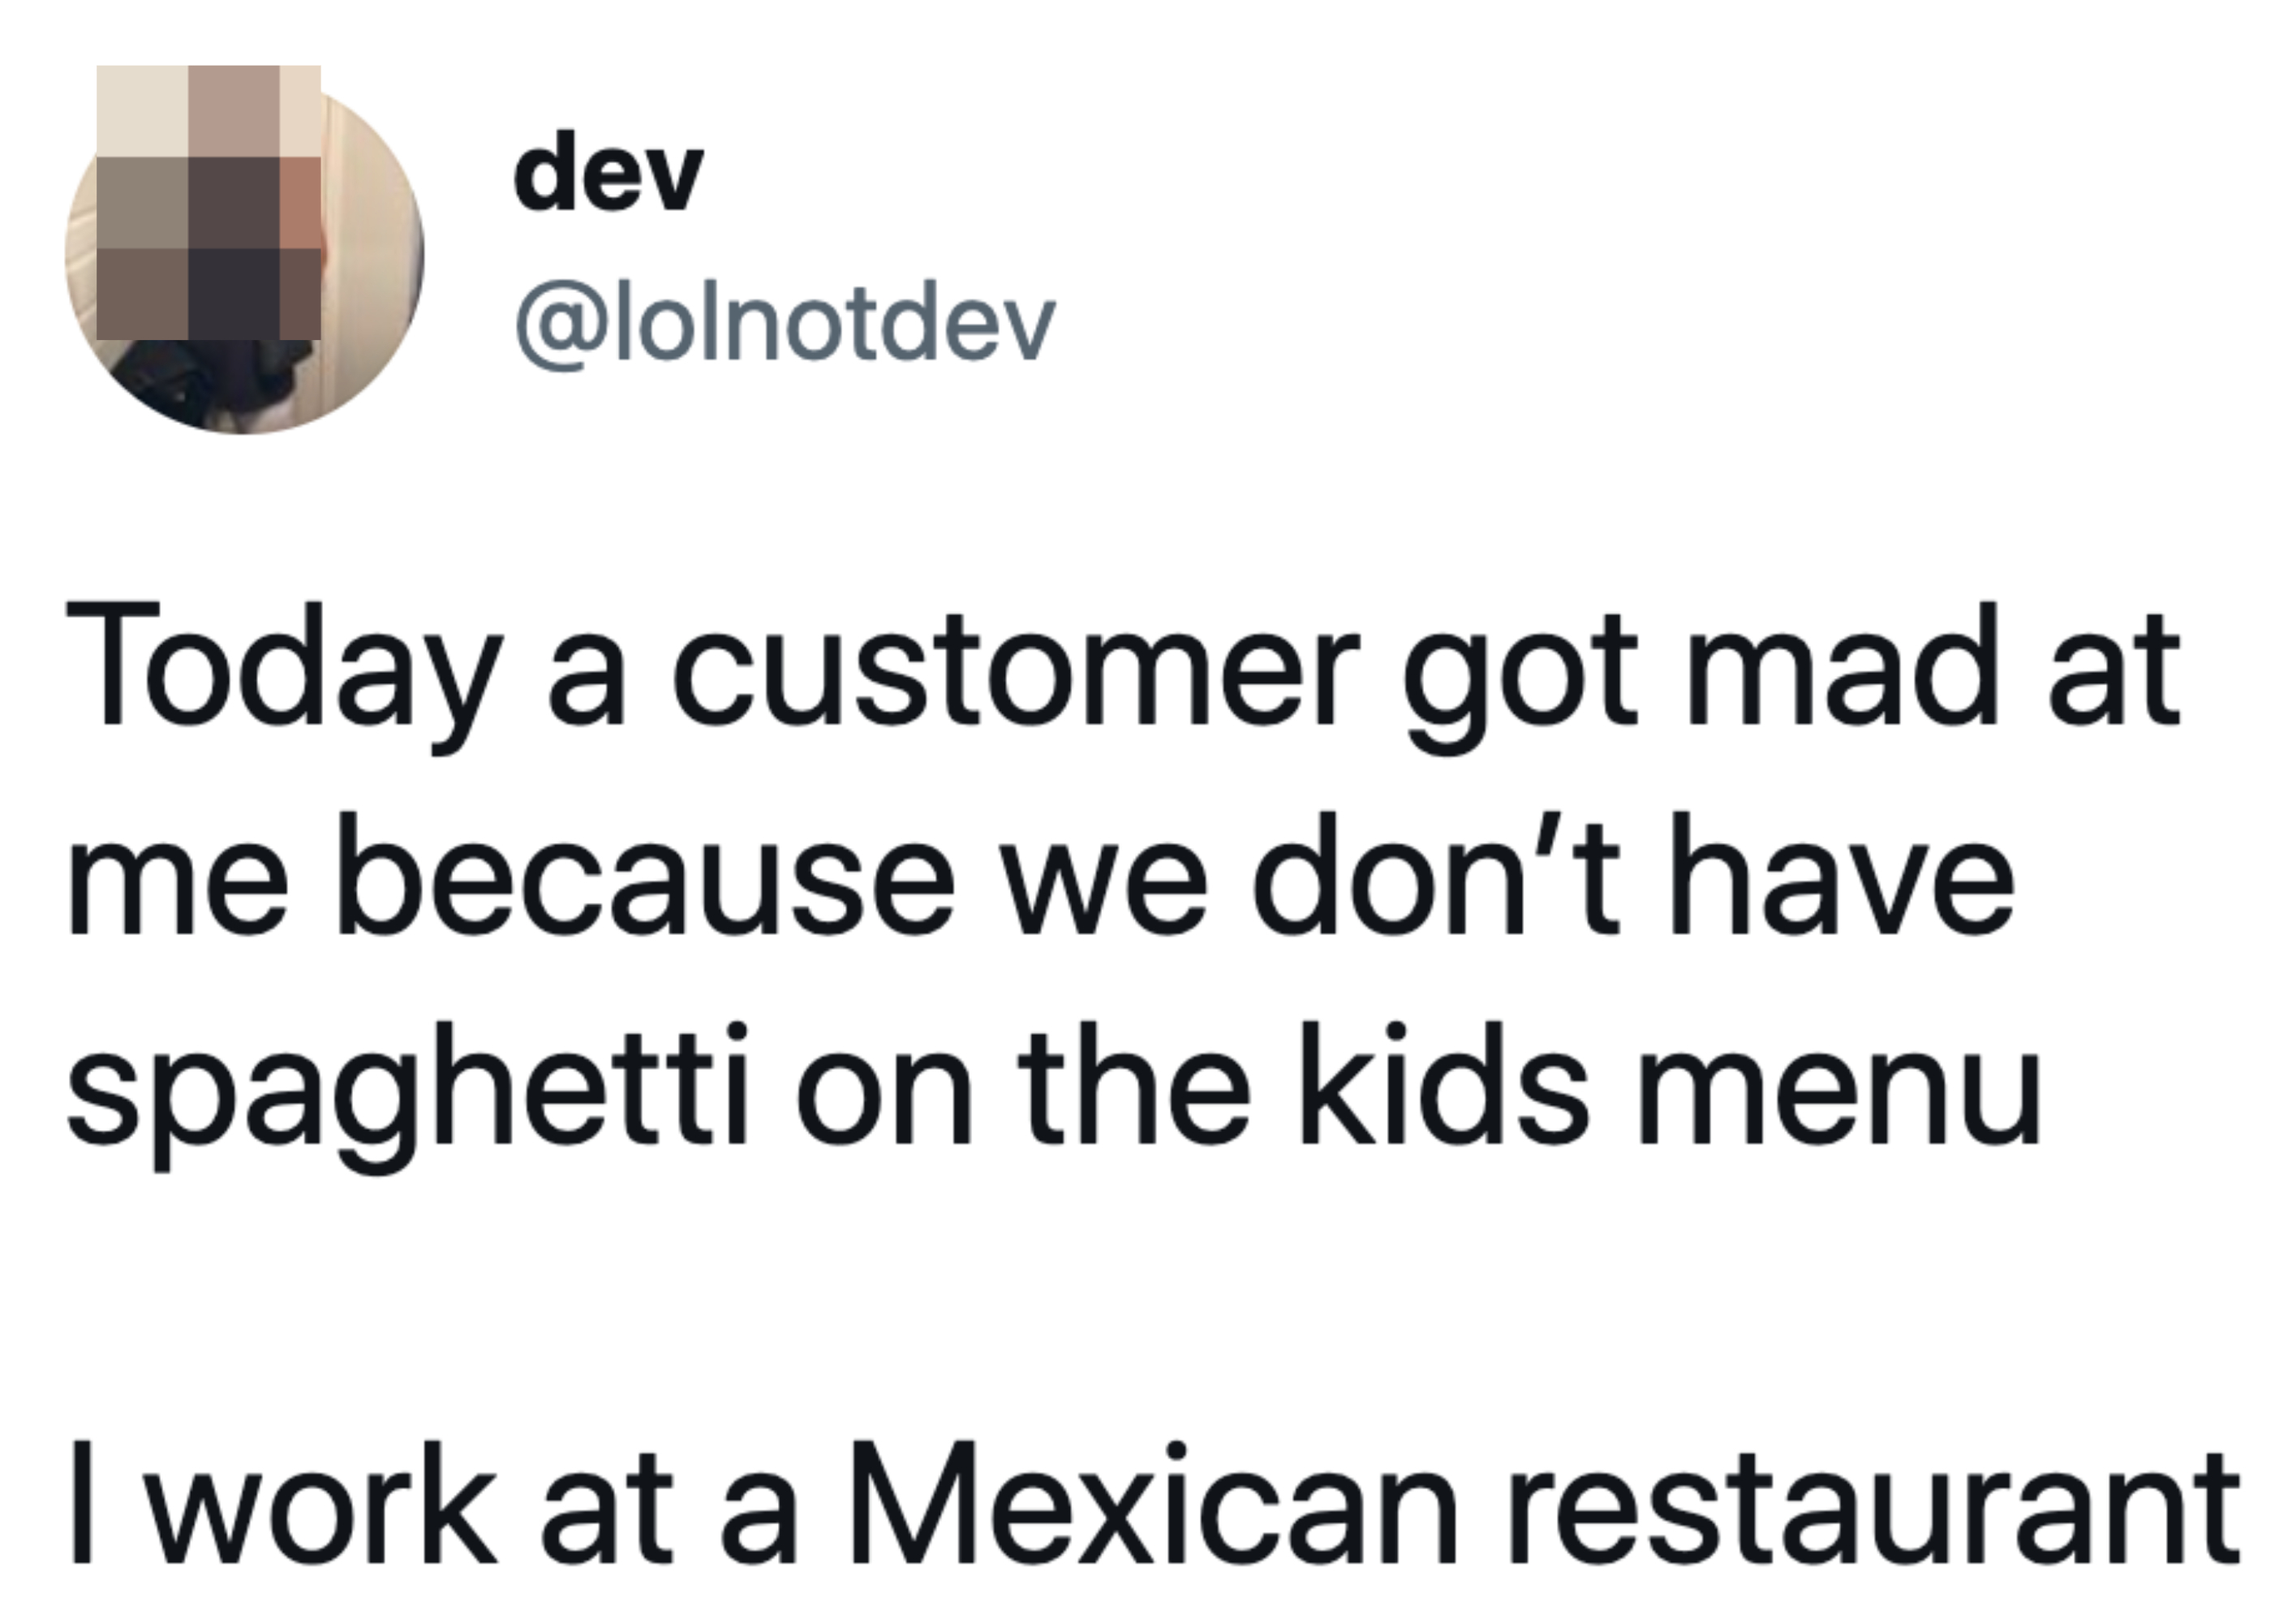 customer asking for spaghetti at a mexican restaraunt